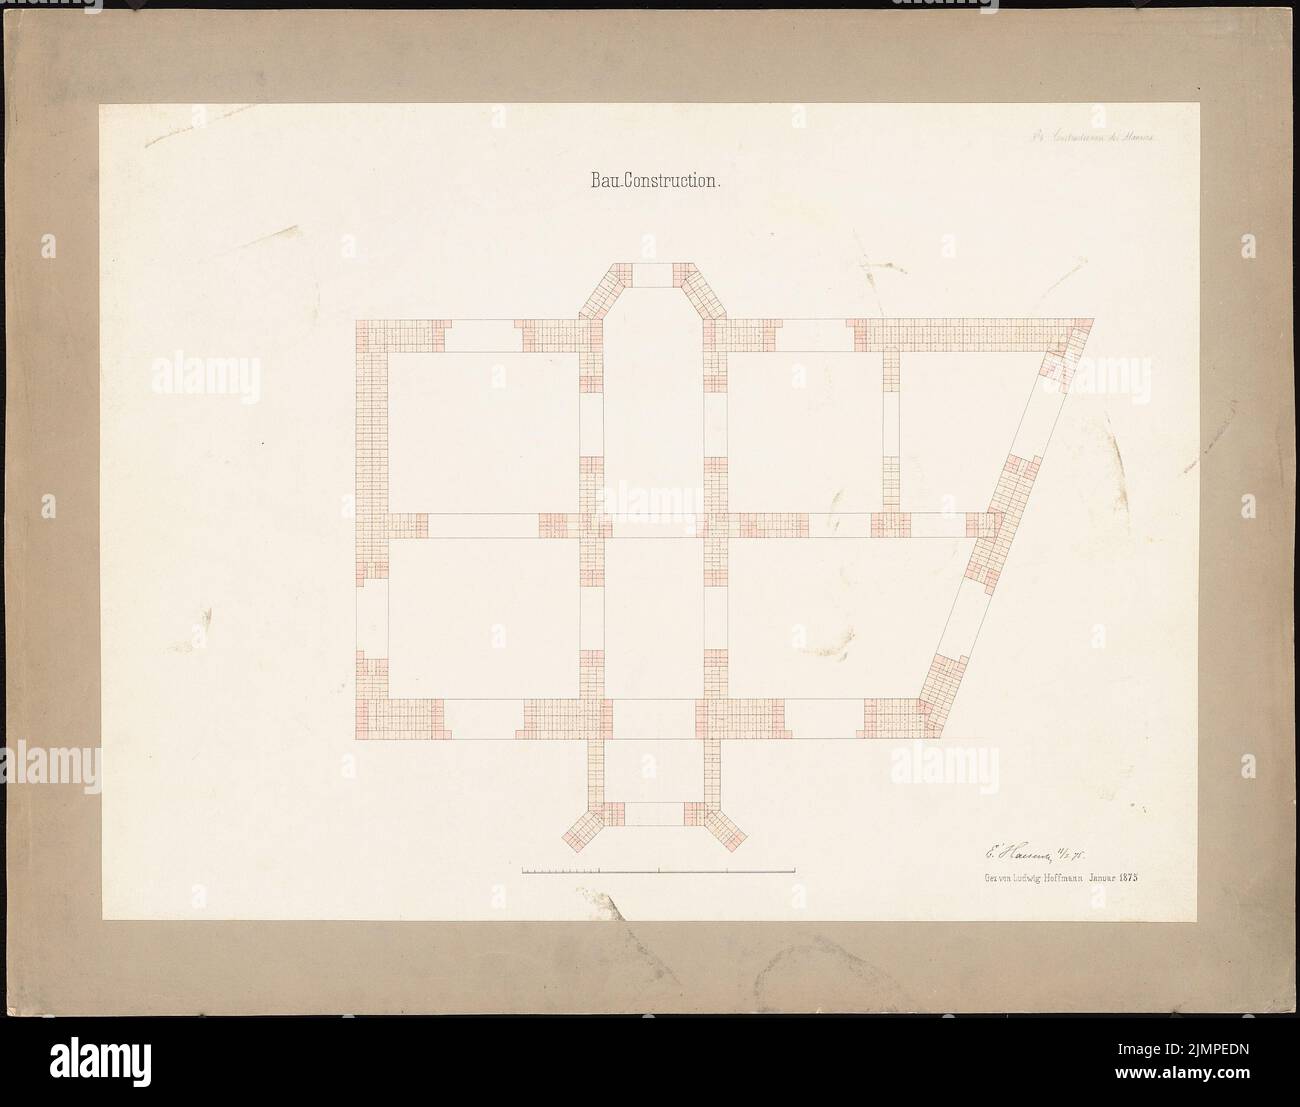 Hoffmann Ludwig (1852-1932), construction construction (01.1875): floor plan. Tusche watercolor on the box, 60 x 76.6 cm (including scan edges) Hoffmann Ludwig  (1852-1932): Baukonstruktion Stock Photo